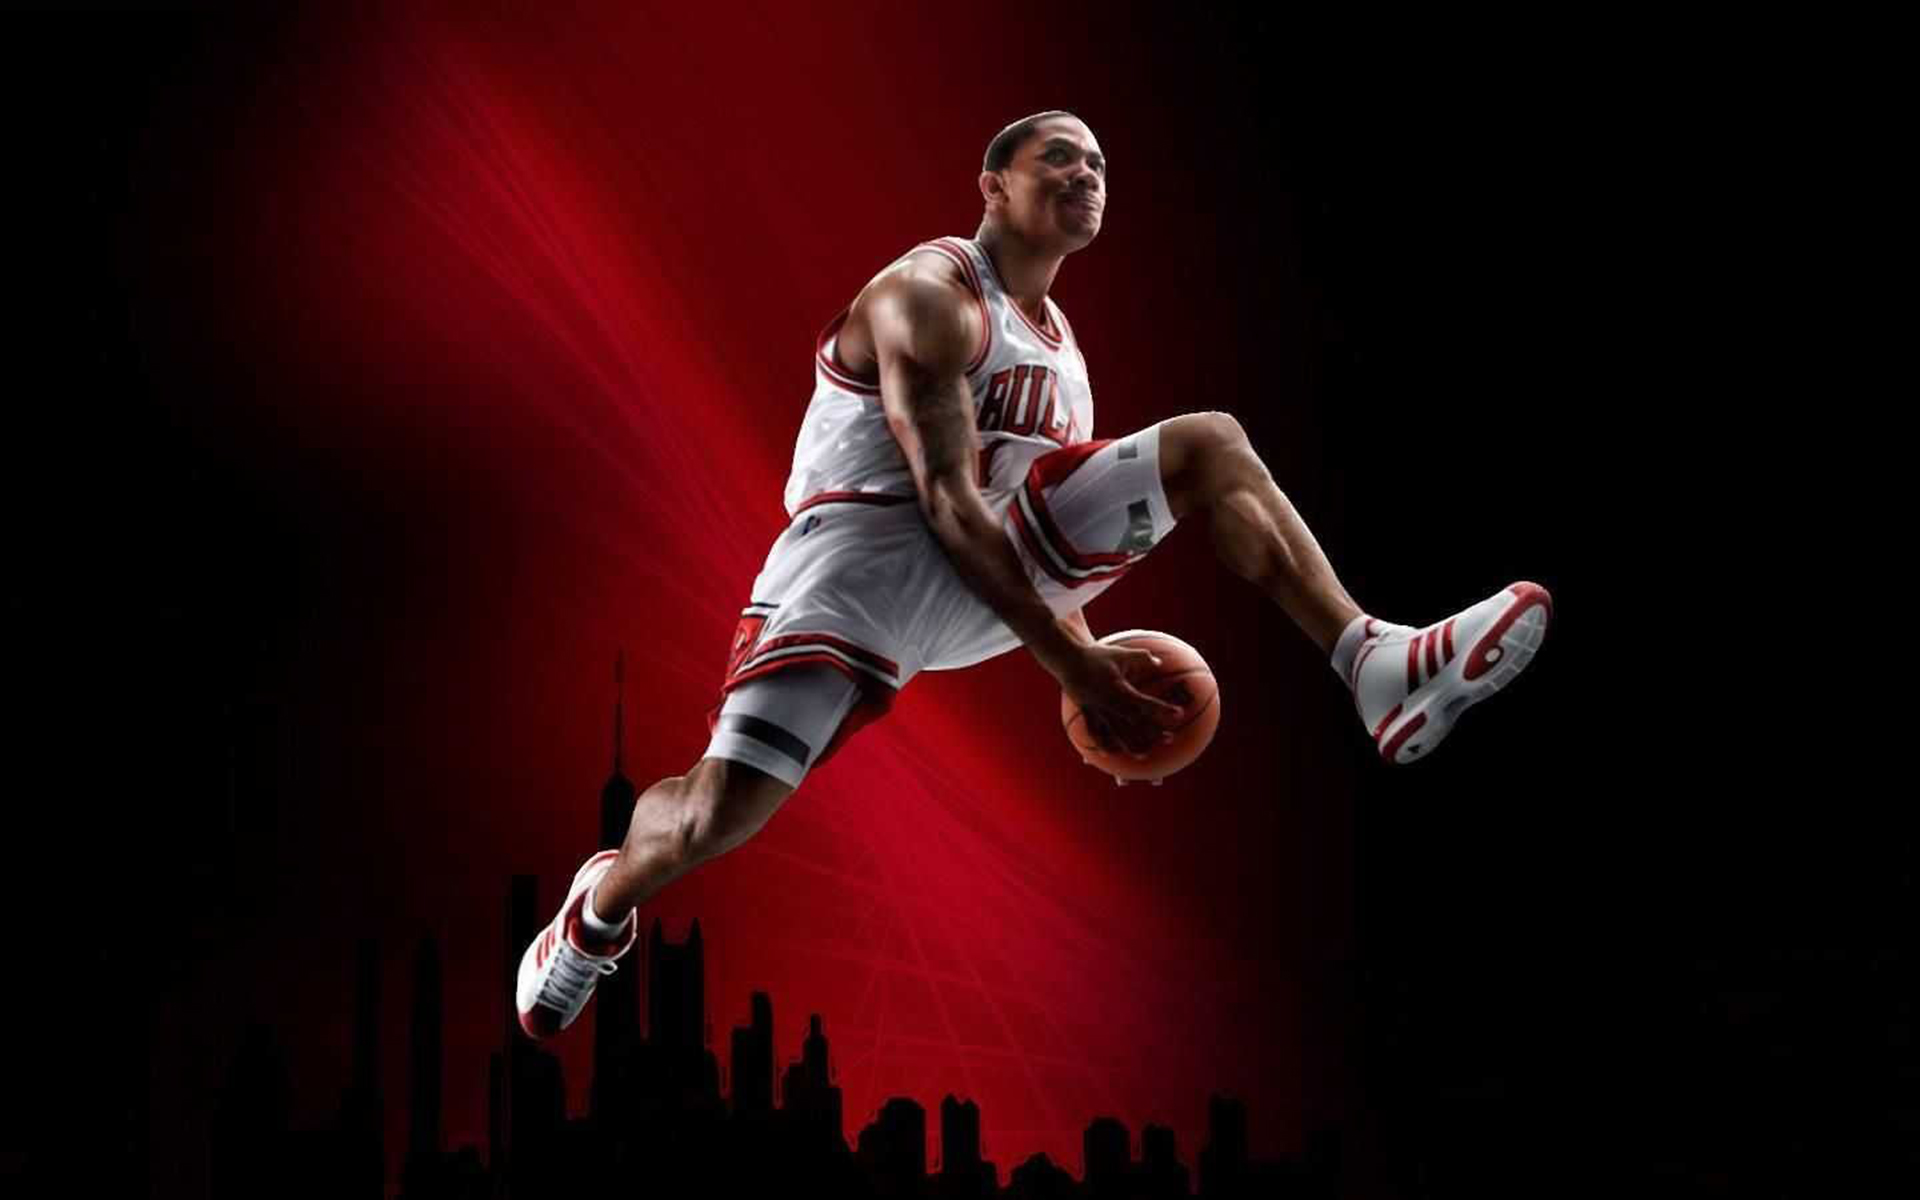 Simple Cool Blood Basketball Background Wallpaper Image For Free Download   Pngtree